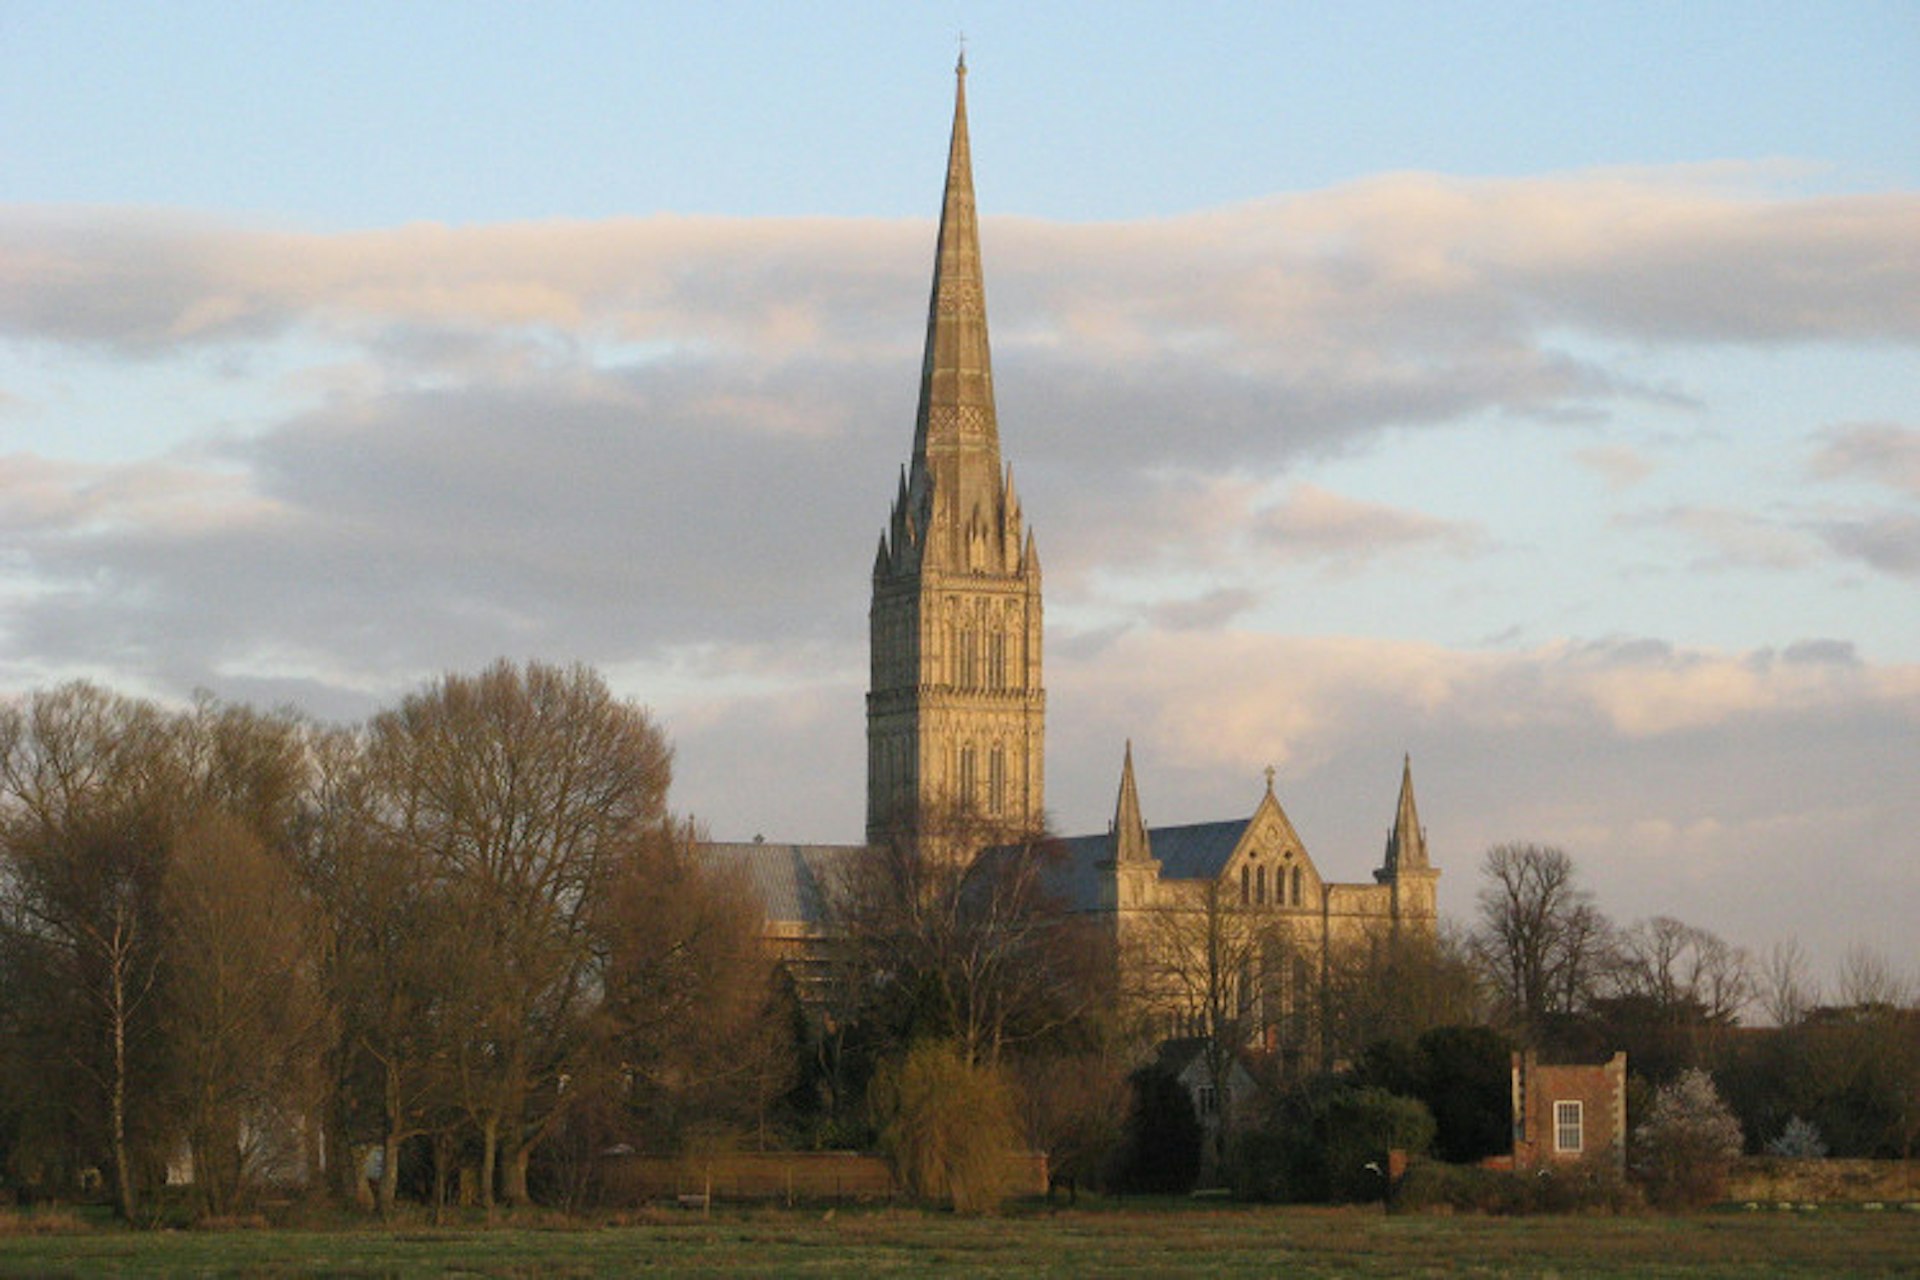 Salisbury Cathedral boasts the tallest spire in Britain. Image by Michael Day / CC BY 2.0